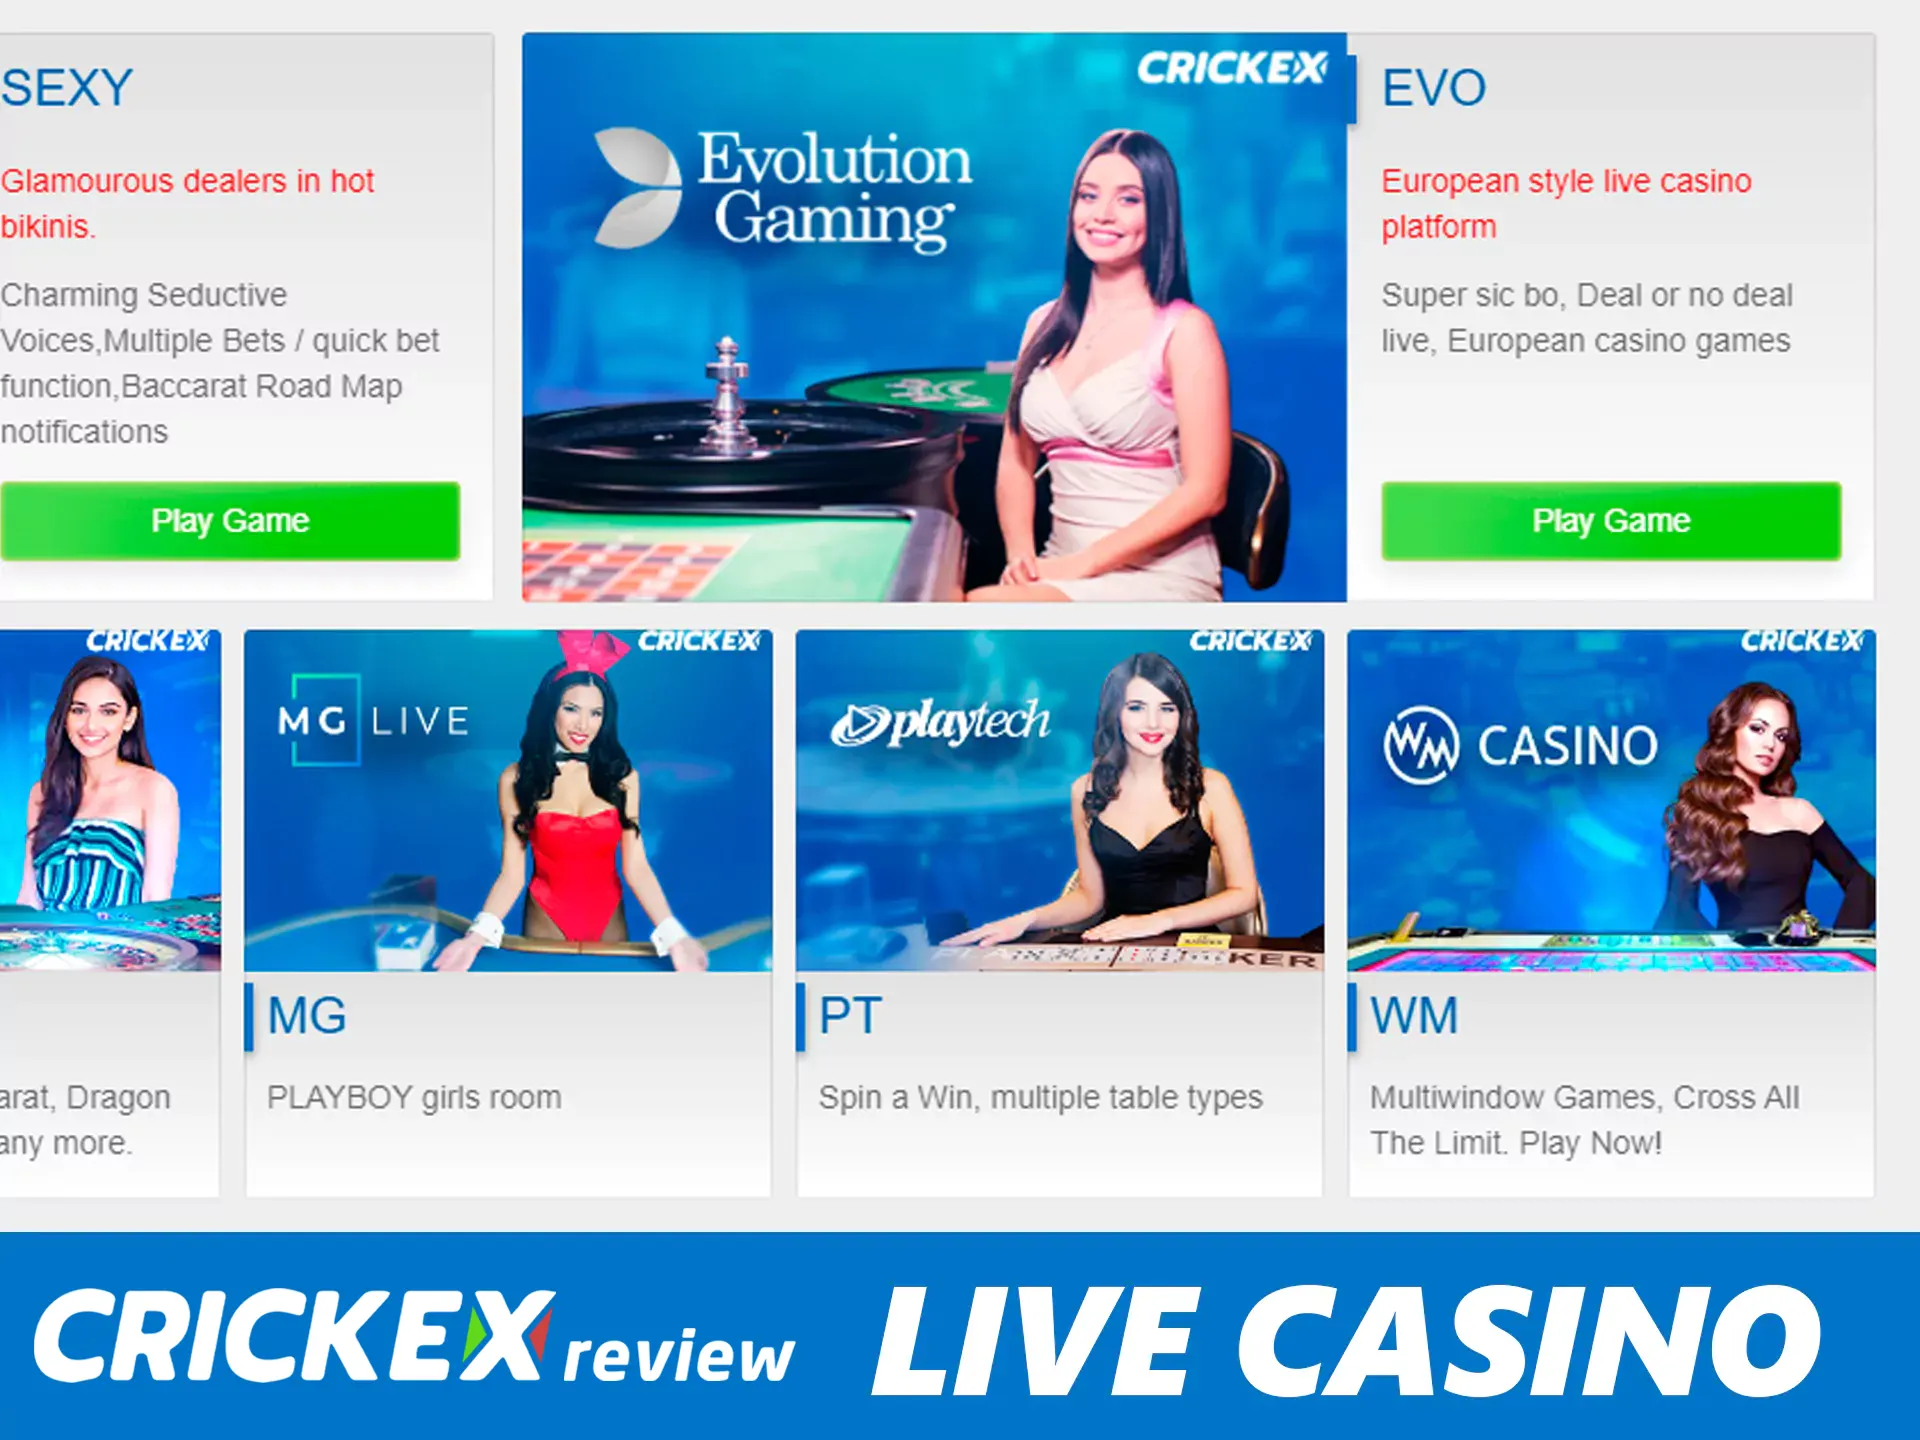 Live dealer games are available on the official Crickex website.